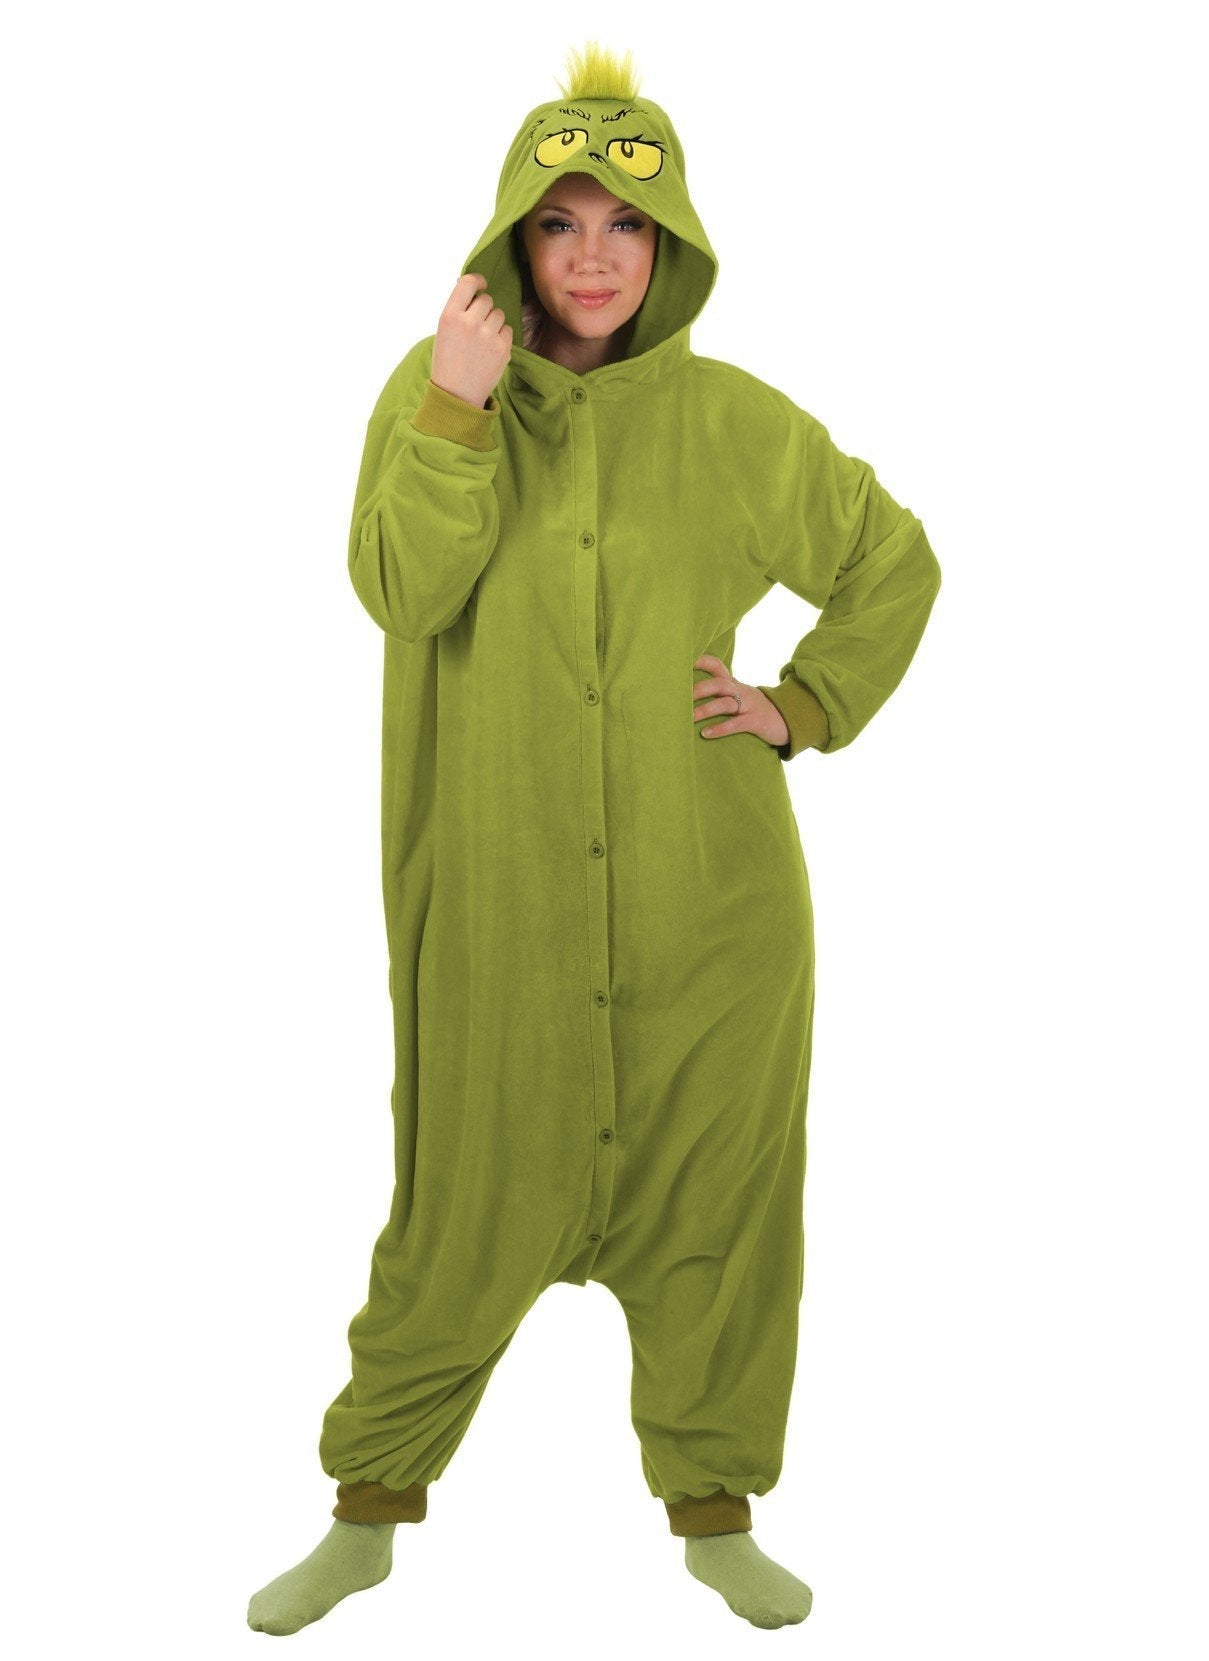 Dr. Seuss The Grinch Onesie Adult Costume (Standard Size) - JJ's Party House